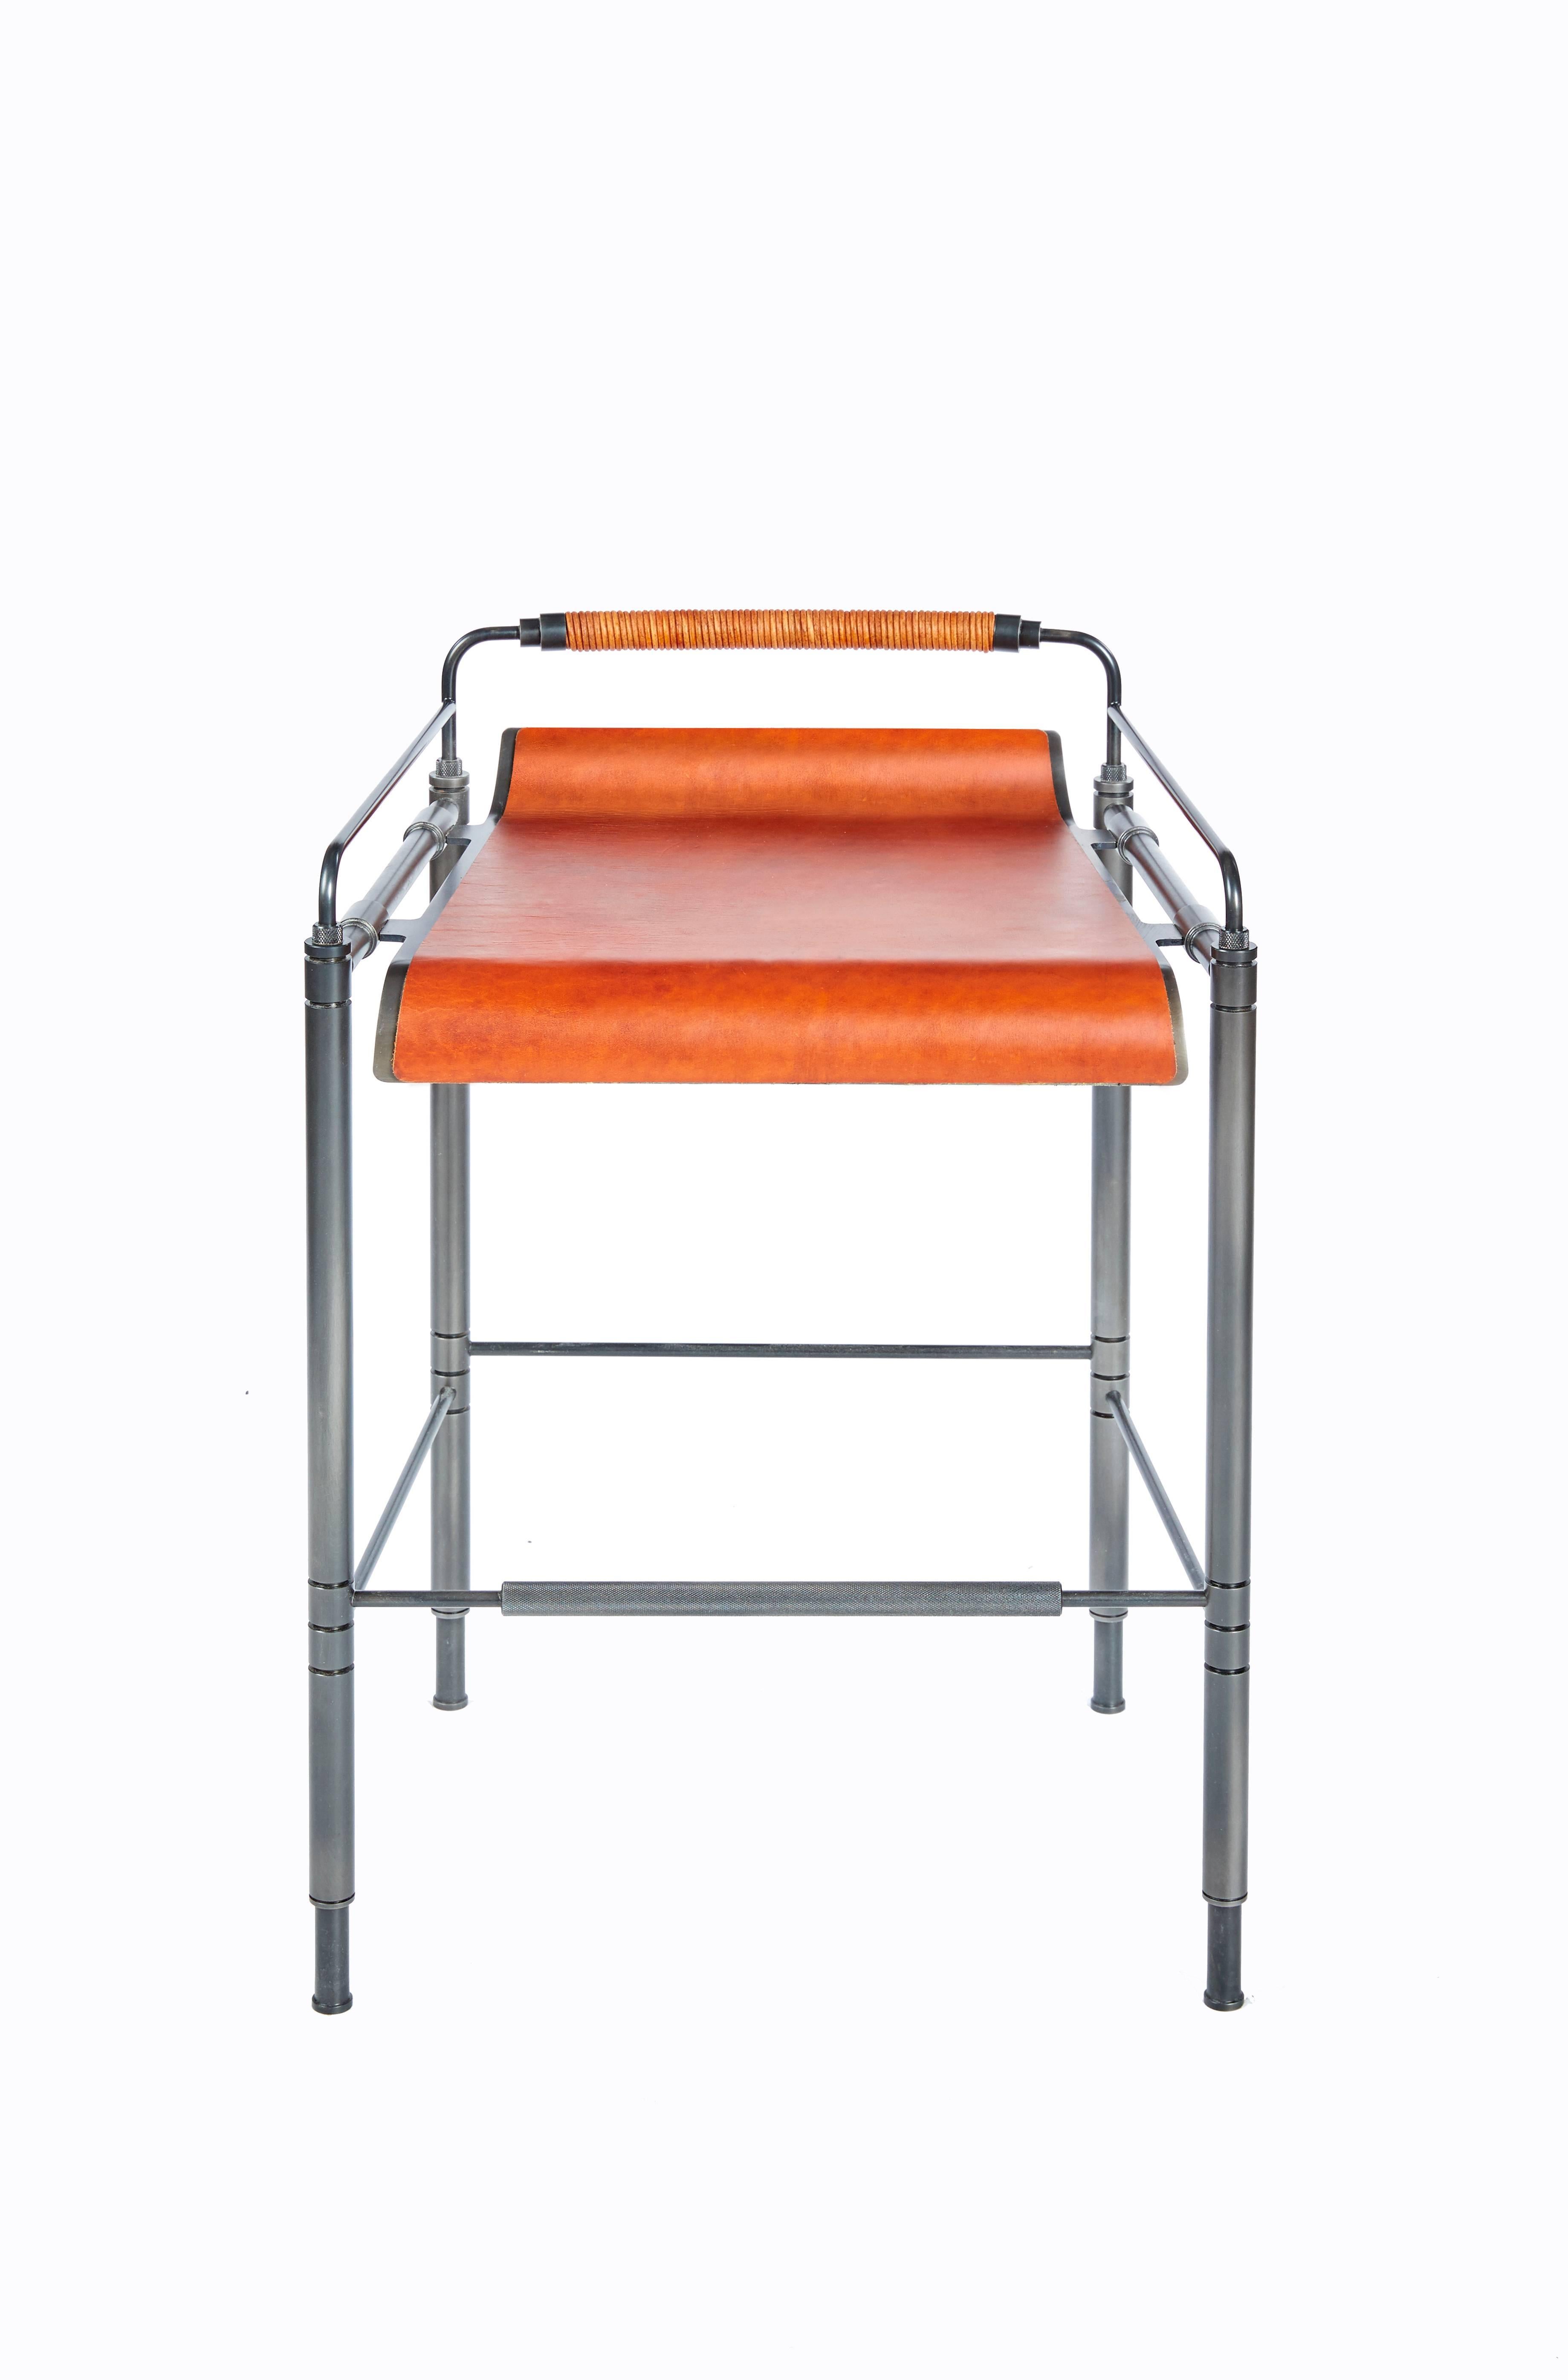 Amuneal’s blackened steel and leather stools are fabricated from precision machined and laser-cut steel components. The laser-cut and formed seat is hand clad in leather and suspended from machined connections. The seat back is hand-wrapped in